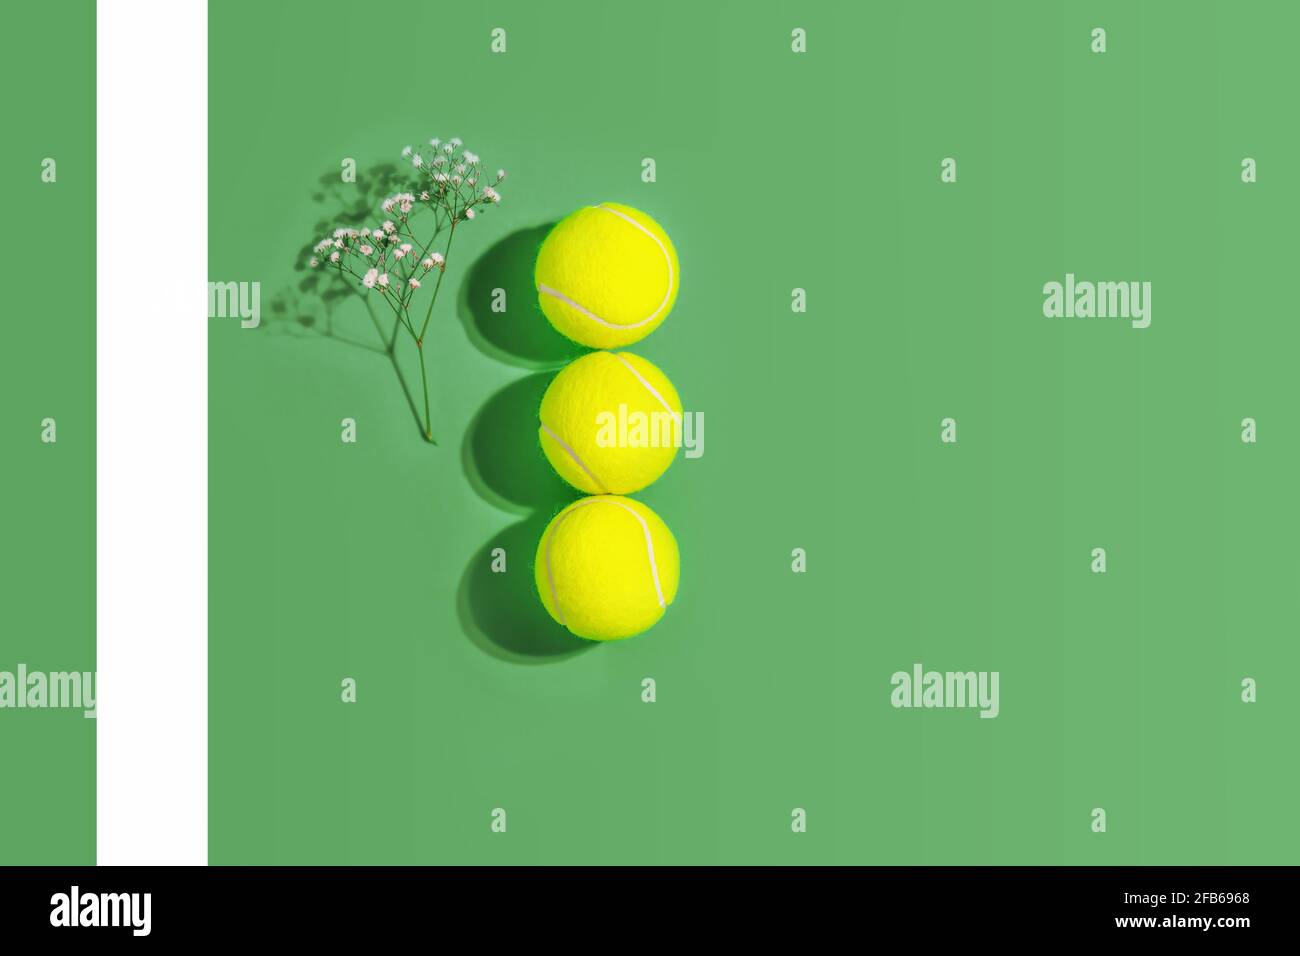 Tennis. Spring sport composition with three yellow tennis balls and flowers on a green background of hard tennis court with copy space Stock Photo